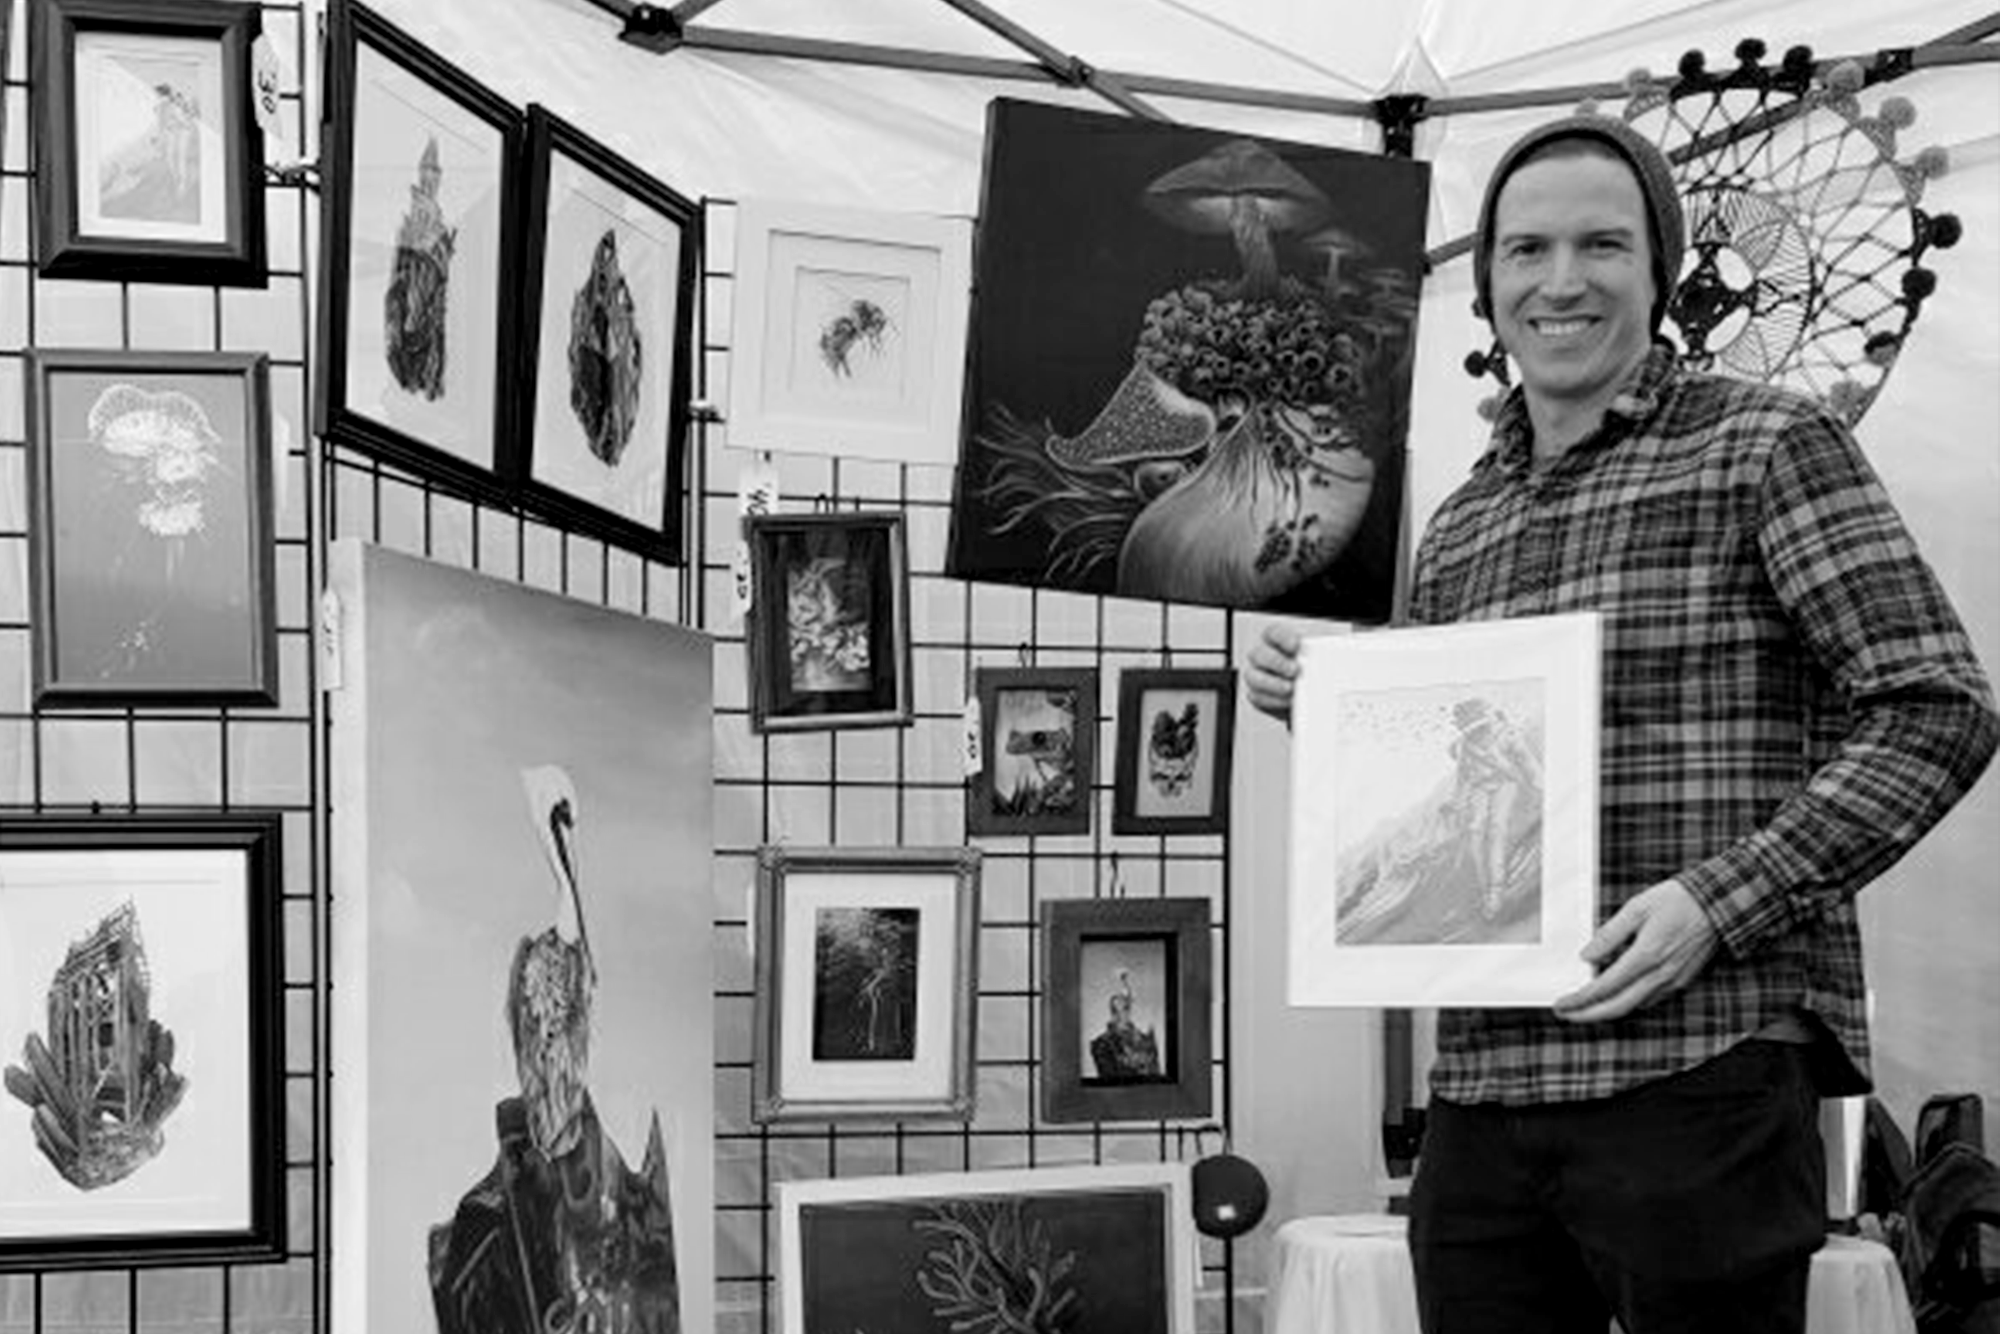 Ryan Breault standing next to artwork at a local market